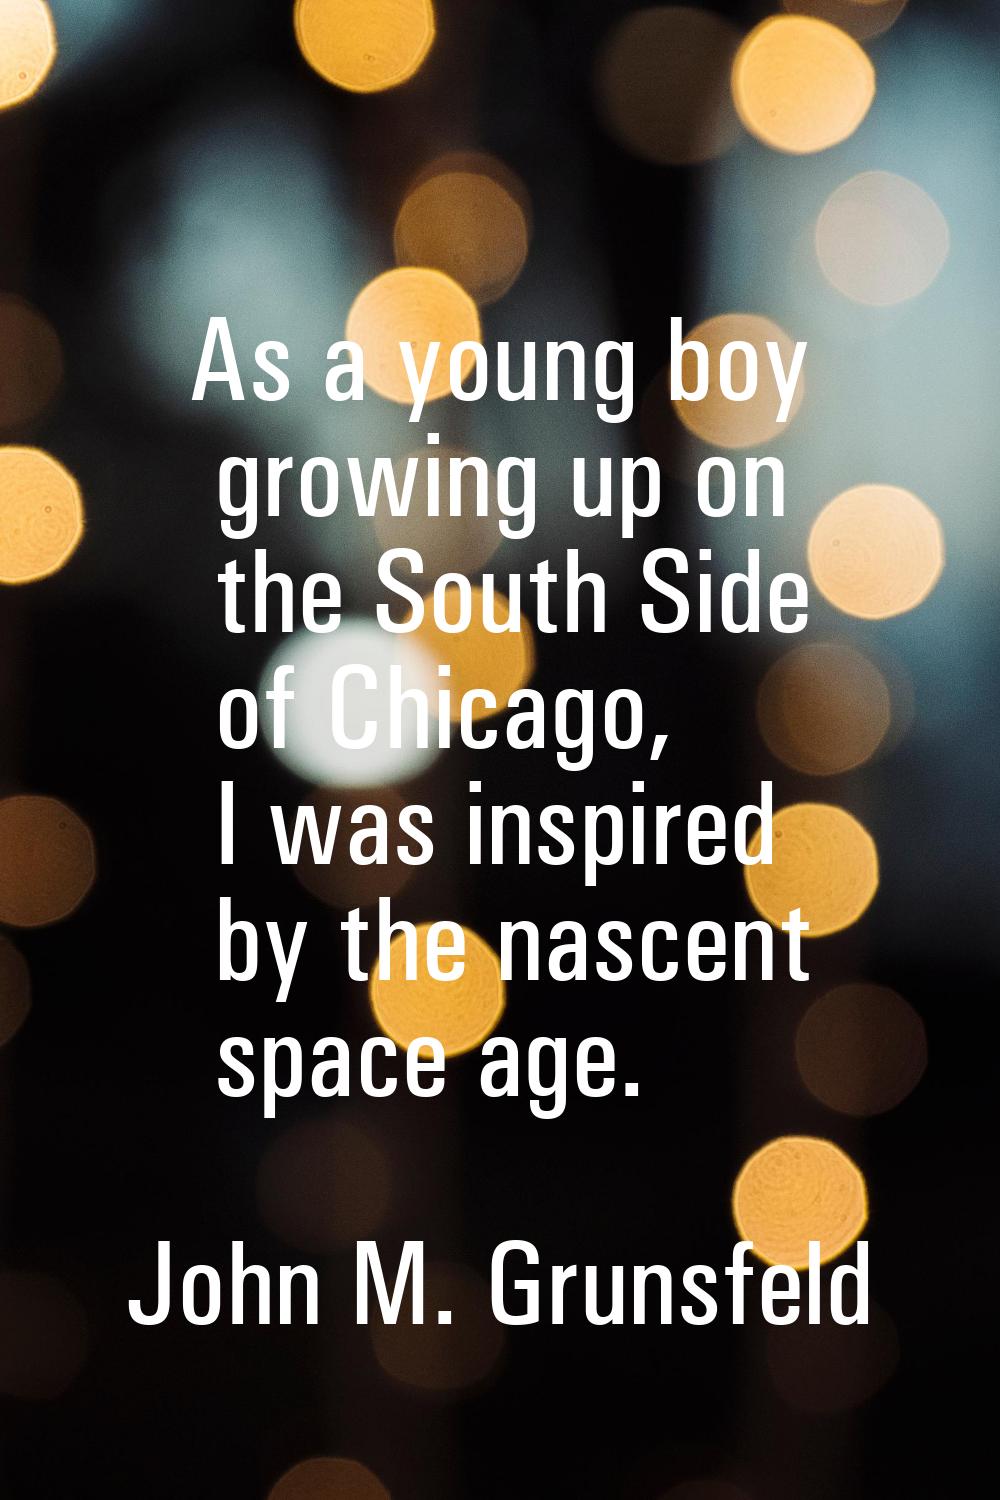 As a young boy growing up on the South Side of Chicago, I was inspired by the nascent space age.